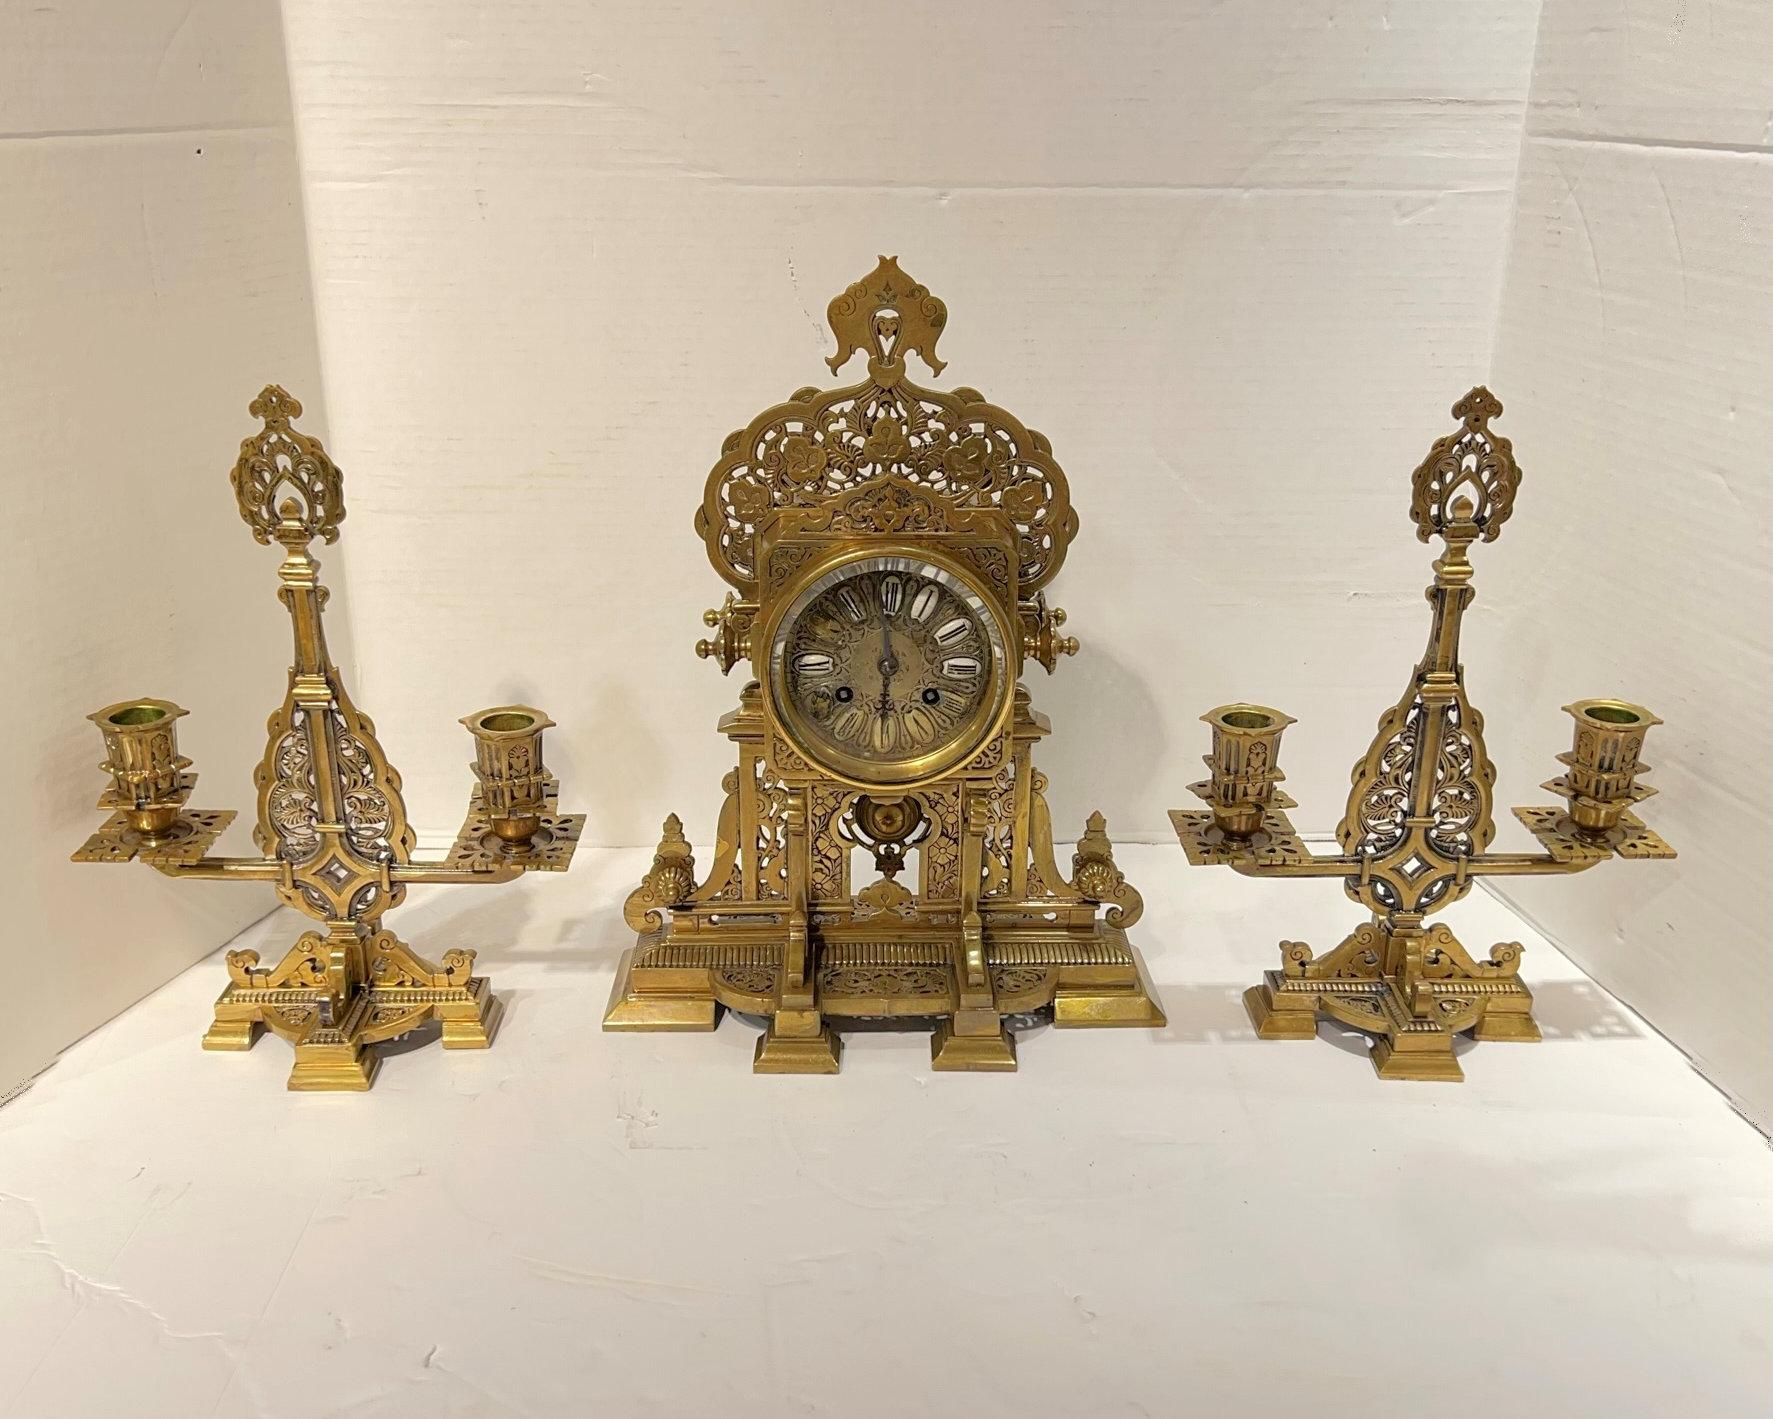 French Mantel Clock and Candelabra Garniture in Islamic Style, circa 1880s. Clock measures 13.5 by 10.5 by 6 inches.